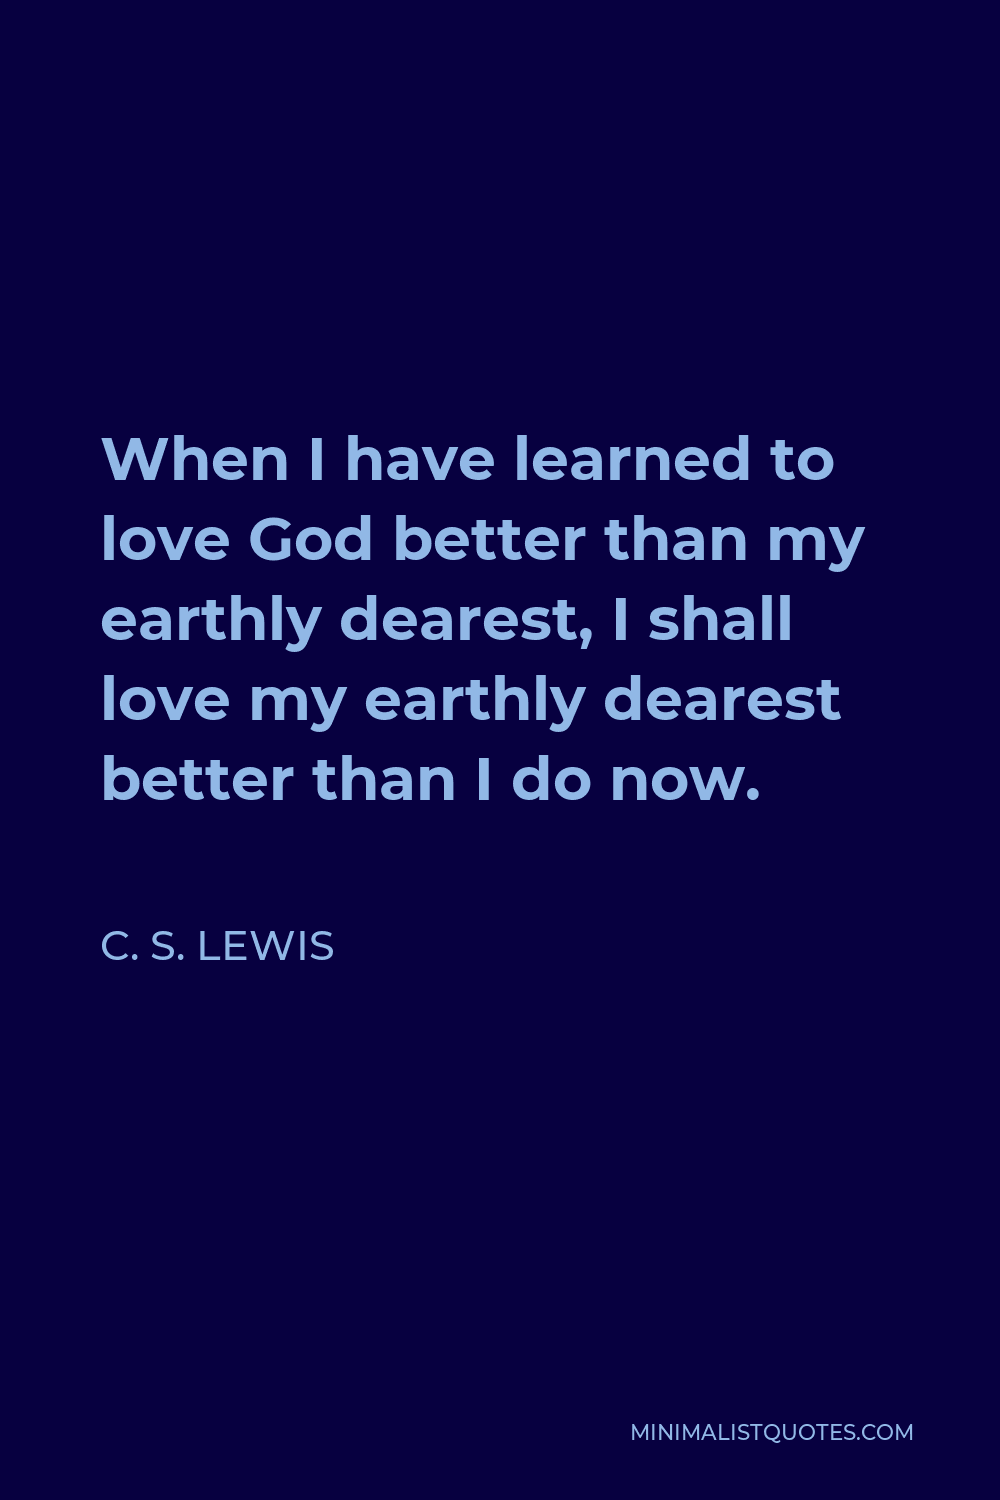 C. S. Lewis Quote - When I have learned to love God better than my earthly dearest, I shall love my earthly dearest better than I do now.